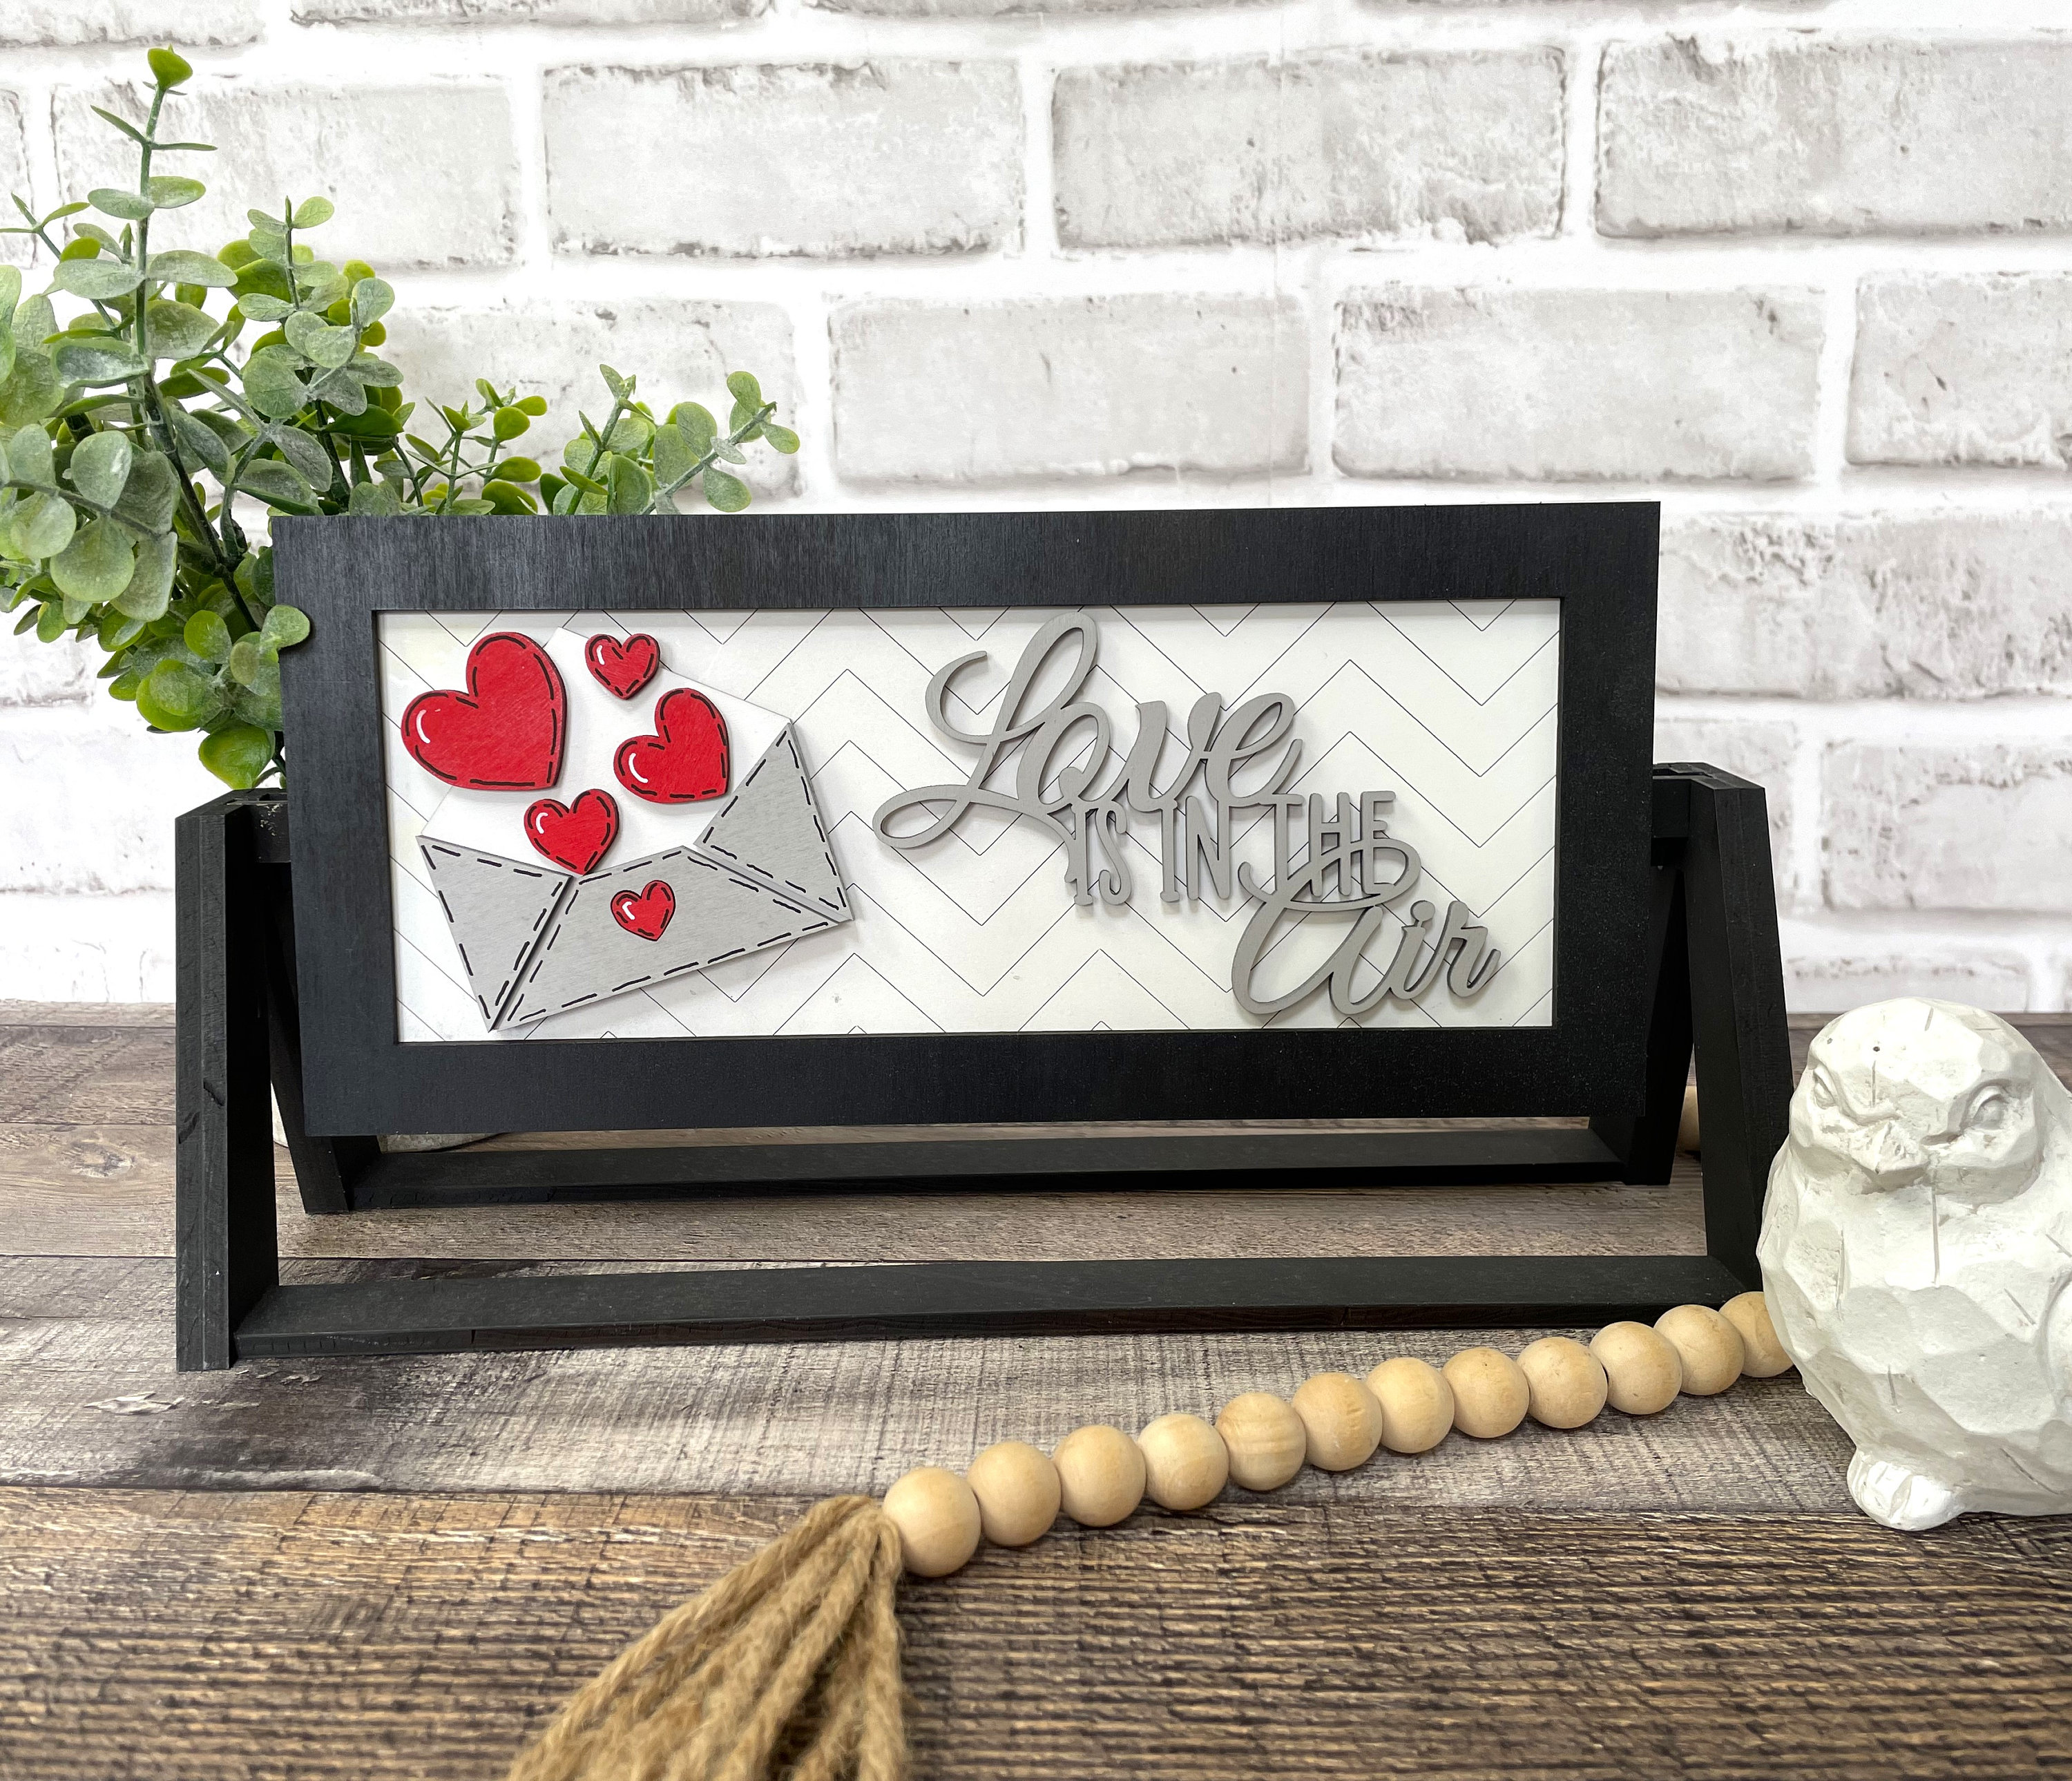 LOVE is in the Air - Boho style valentine's day